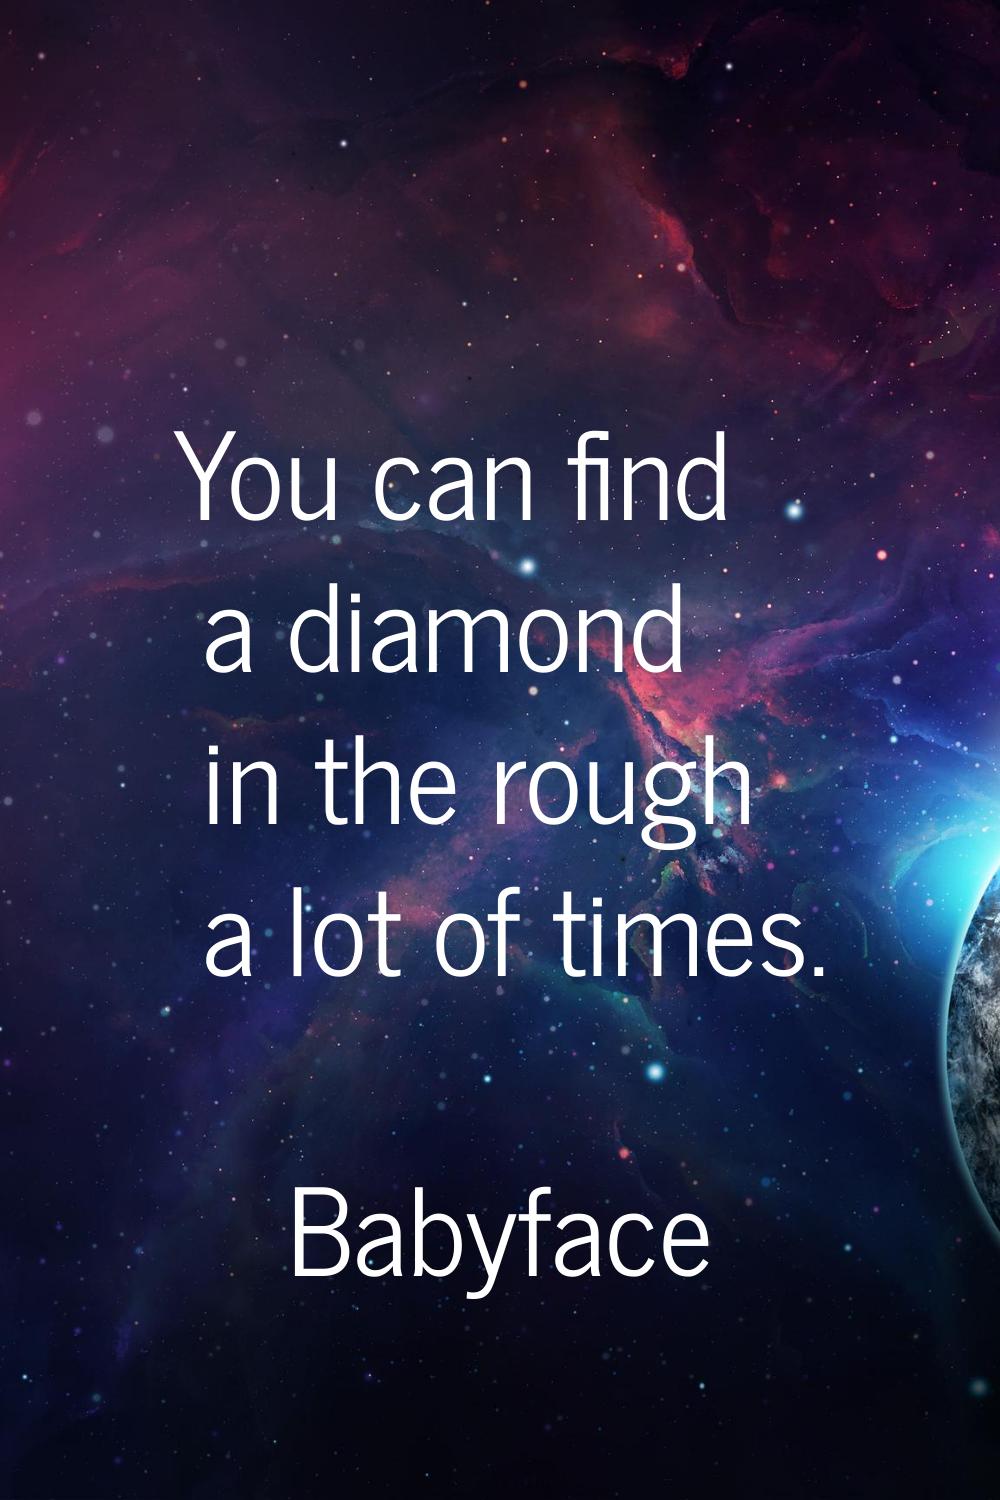 You can find a diamond in the rough a lot of times.